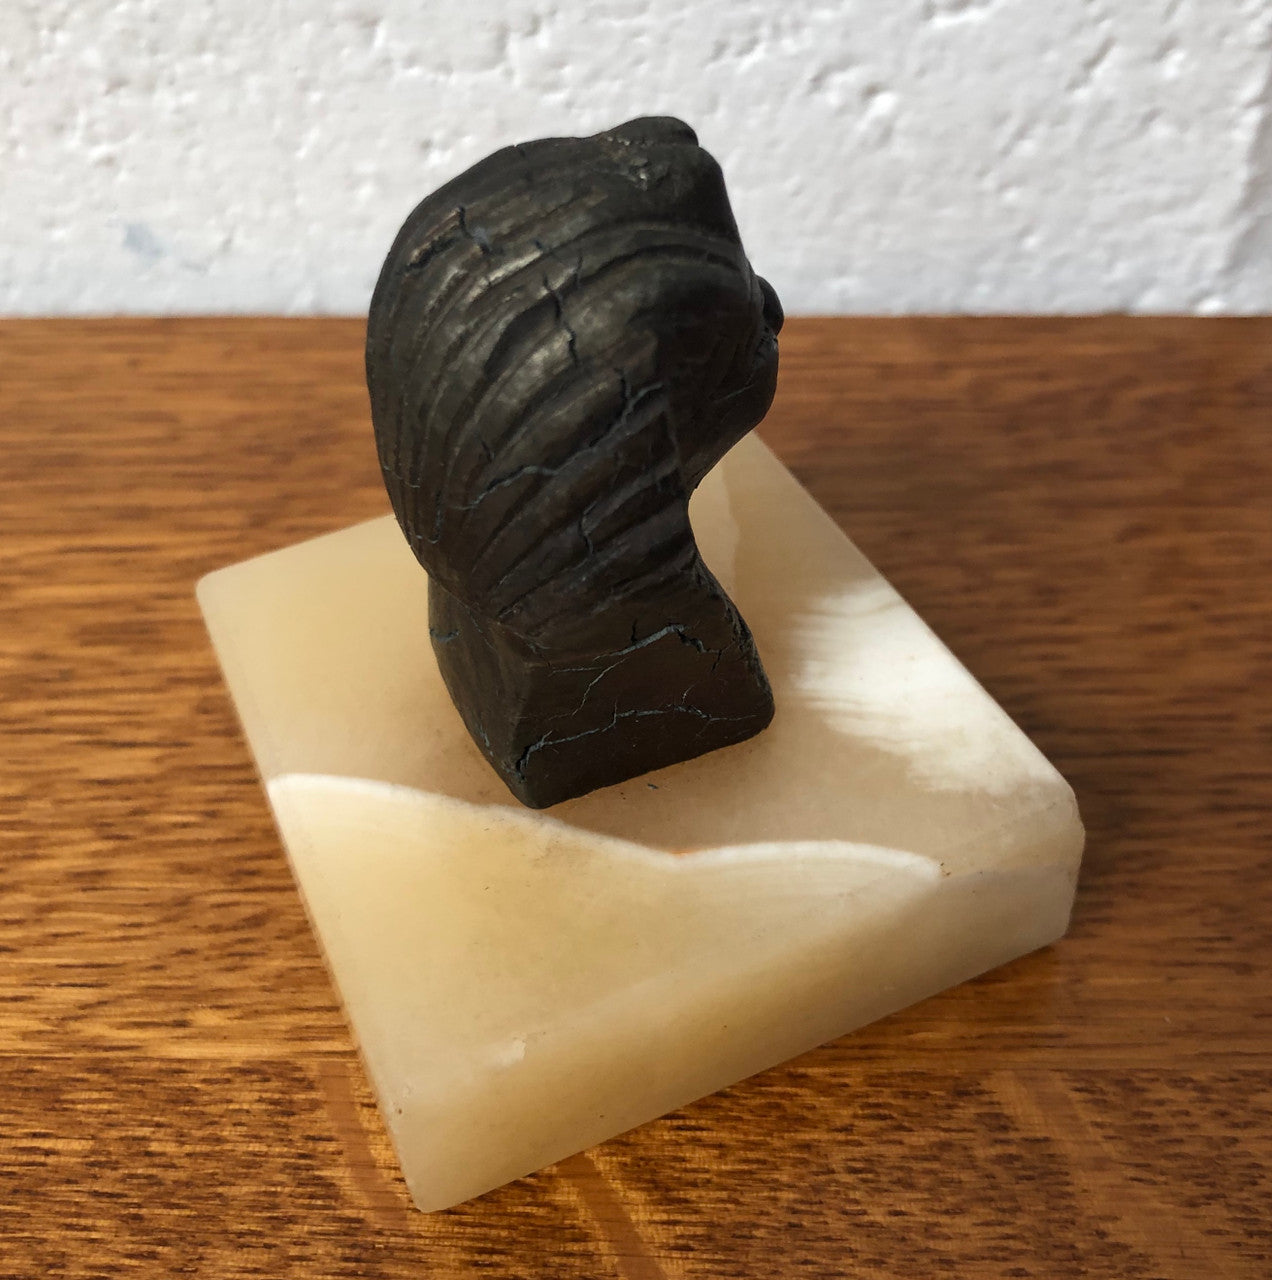 Edwardian Egyptian Sphinx head paperweight. Made from bronze and alabaster marble.